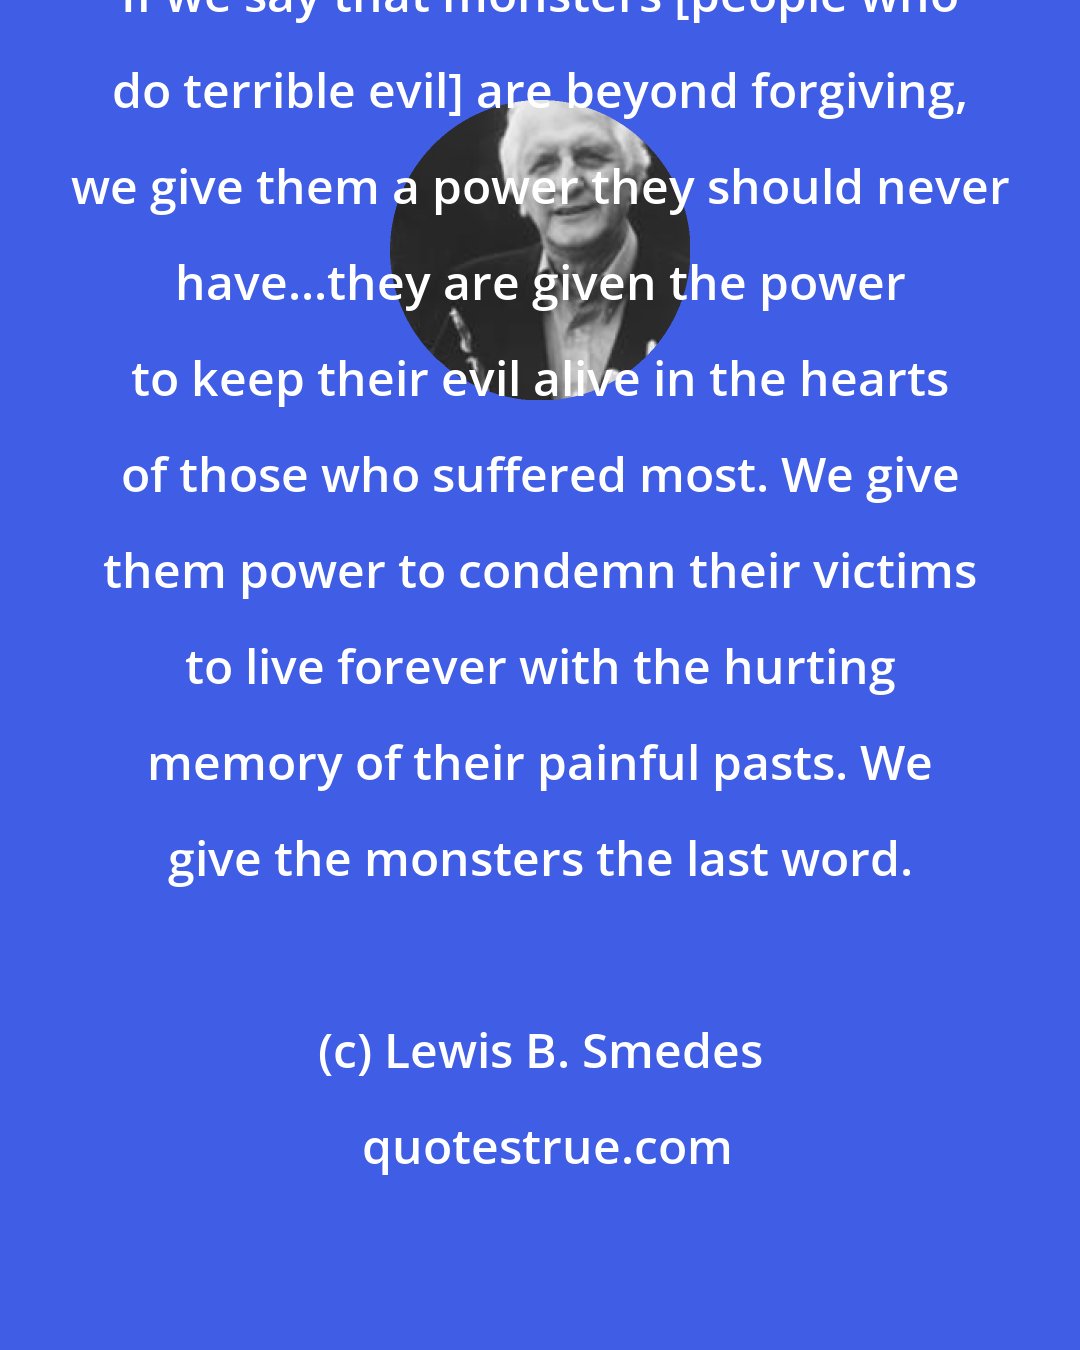 Lewis B. Smedes: If we say that monsters [people who do terrible evil] are beyond forgiving, we give them a power they should never have...they are given the power to keep their evil alive in the hearts of those who suffered most. We give them power to condemn their victims to live forever with the hurting memory of their painful pasts. We give the monsters the last word.